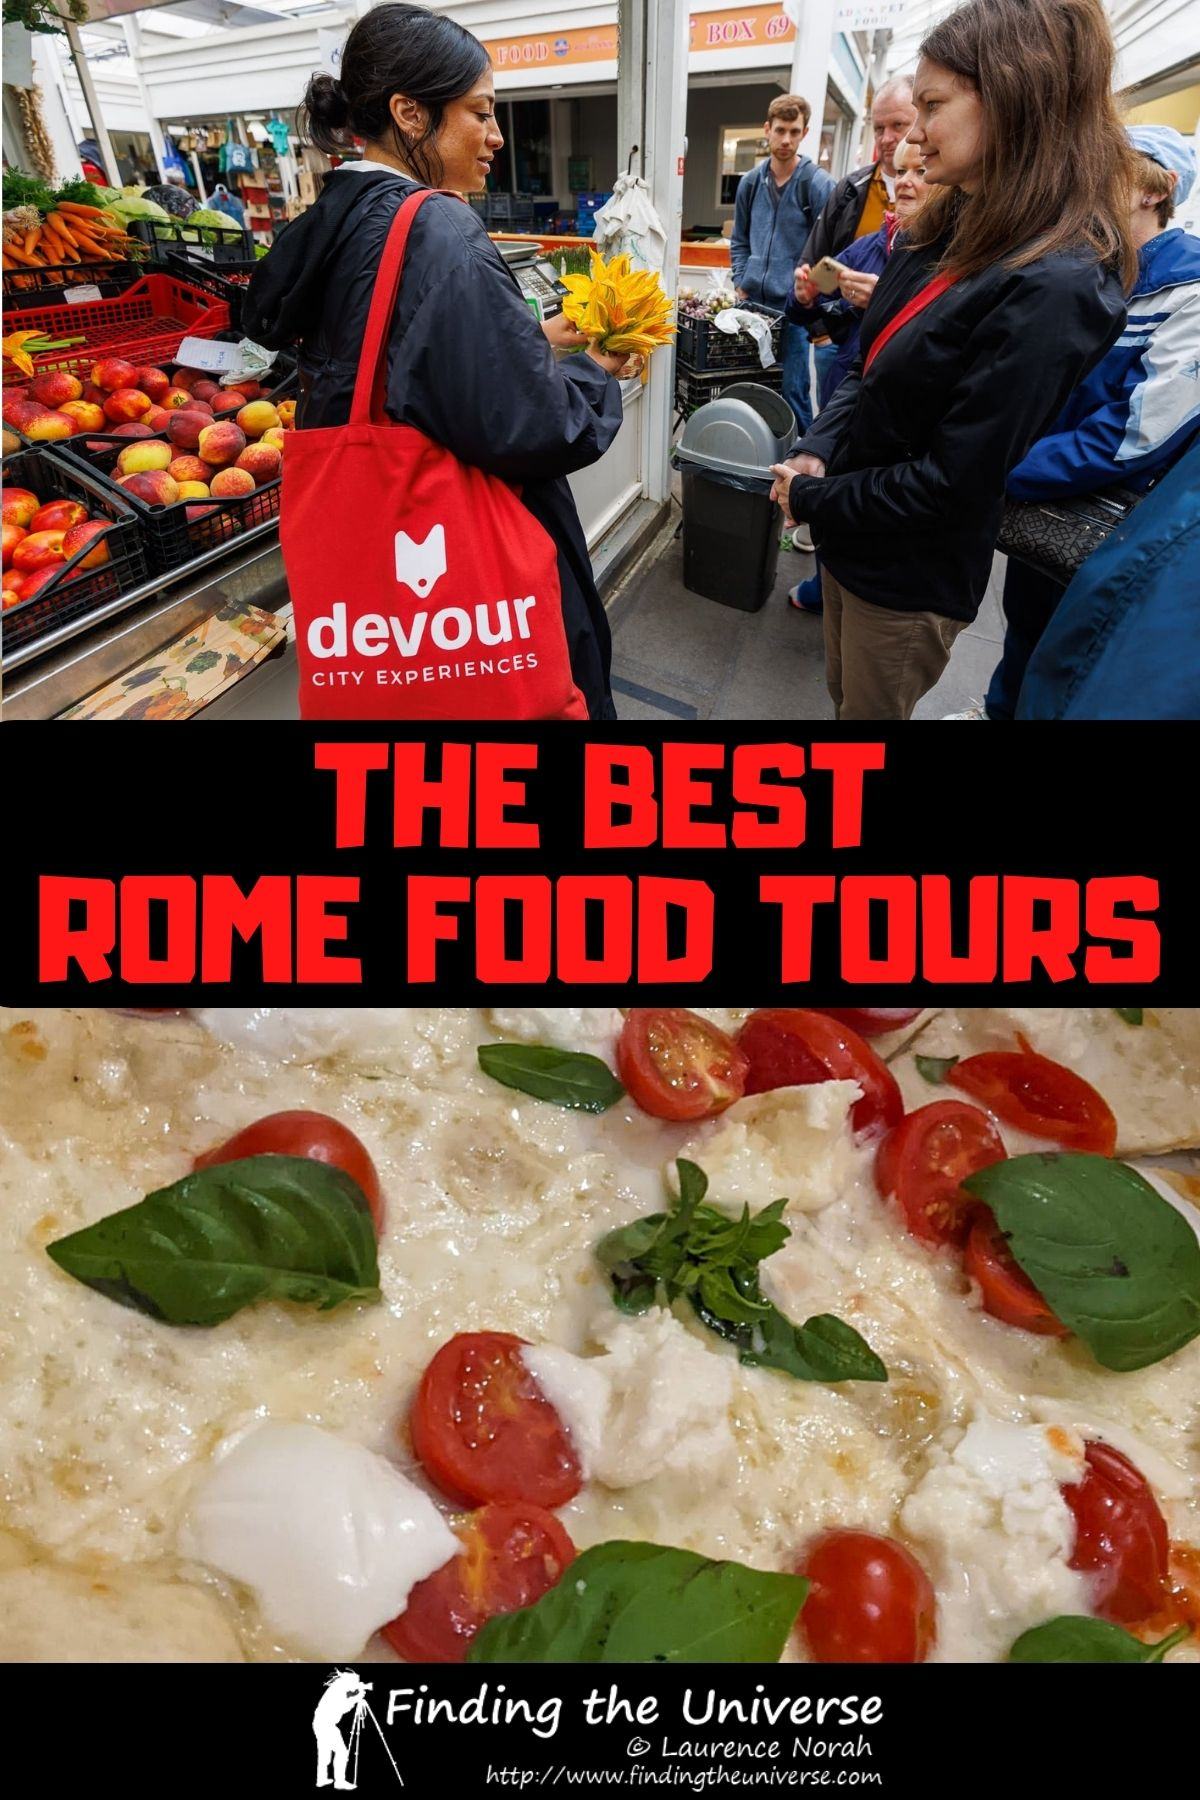 A guide to the best food tours in Rome as well as the best cooking classes in Rome, all based on our personal experiences in the Eternal City